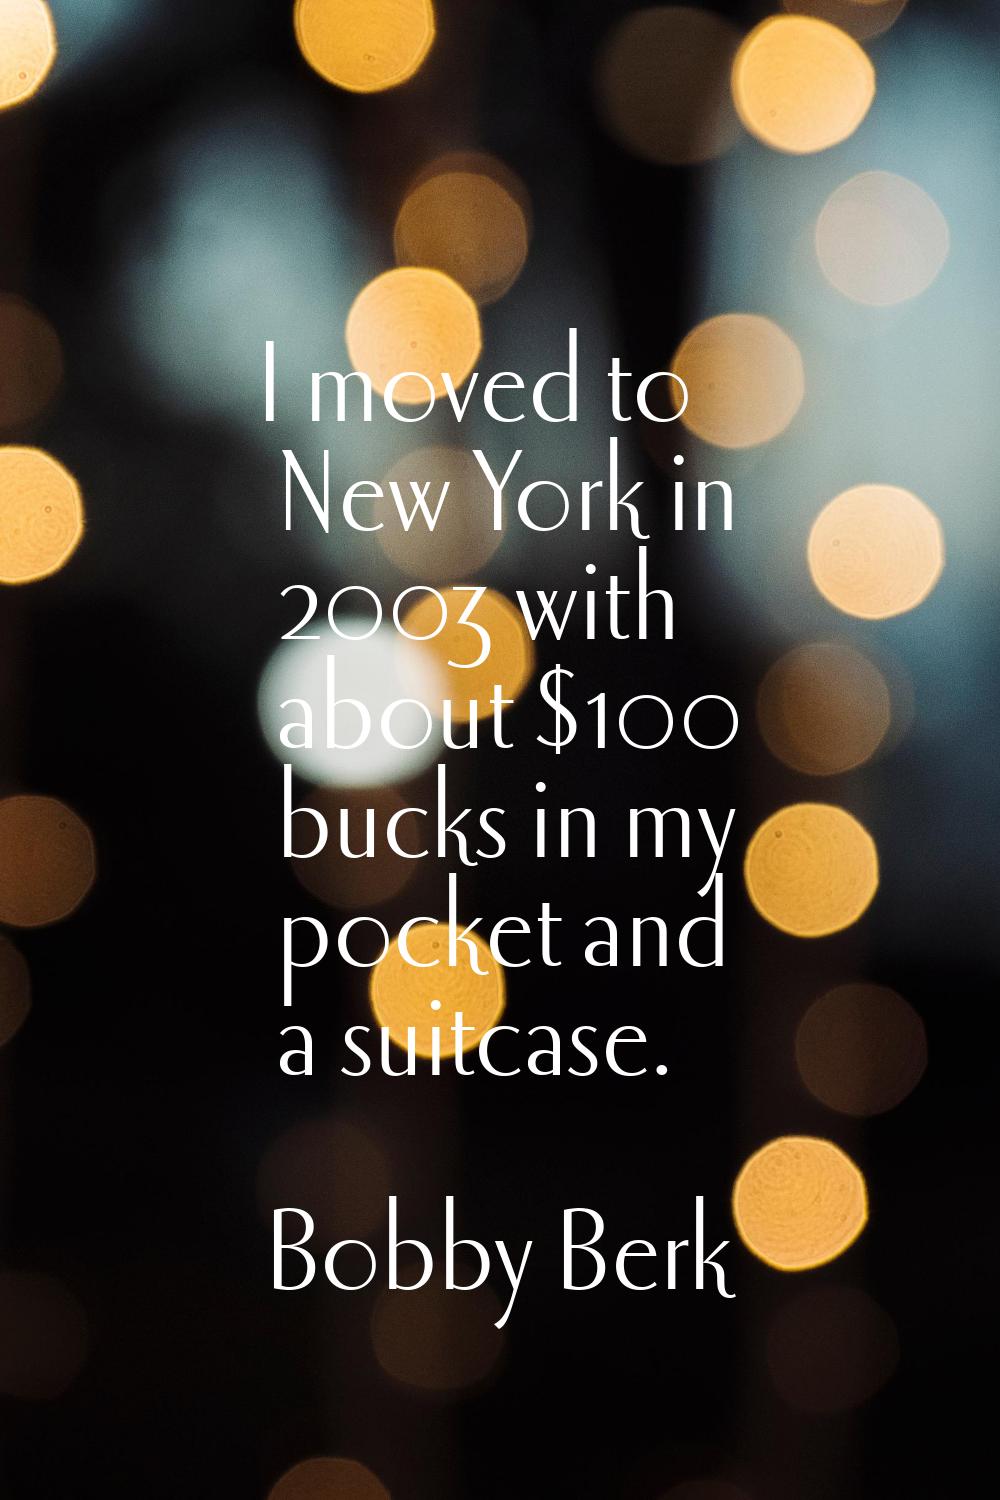 I moved to New York in 2003 with about $100 bucks in my pocket and a suitcase.